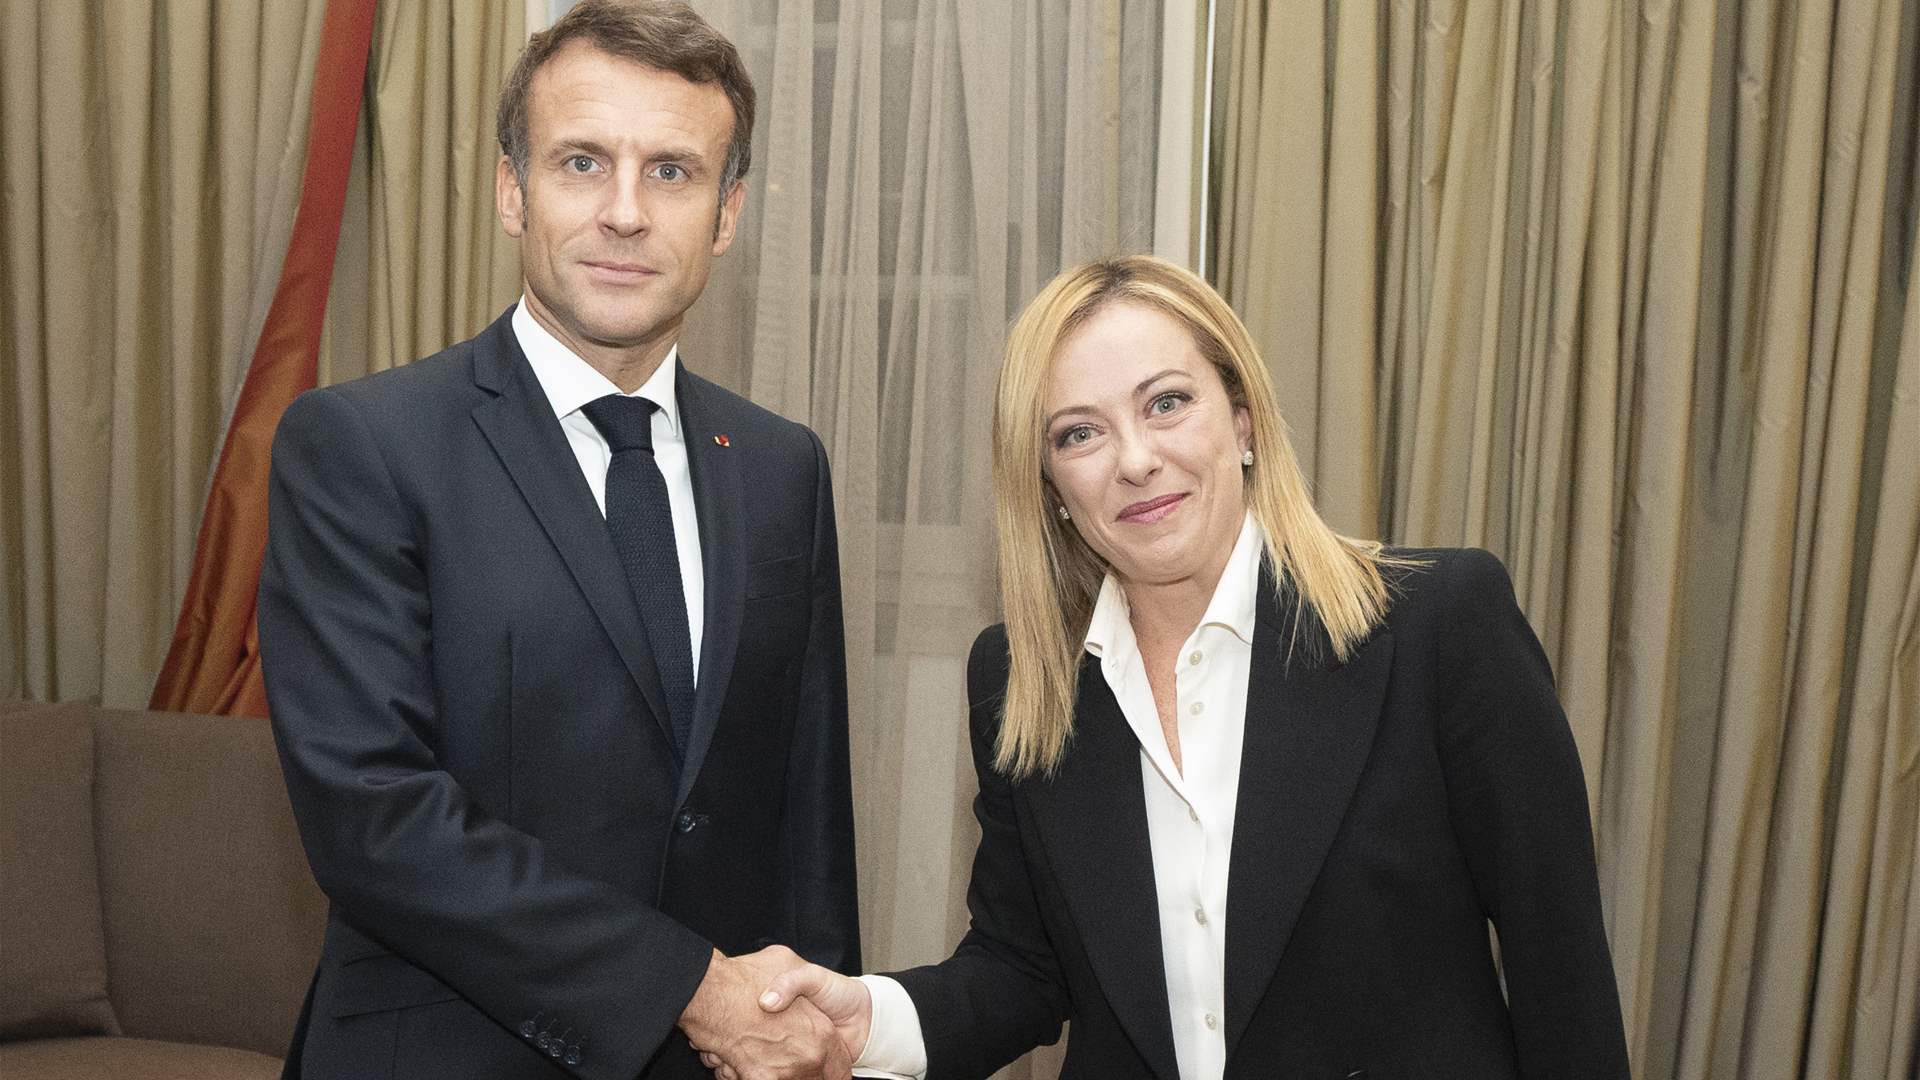 Macron meets Meloni in Rome